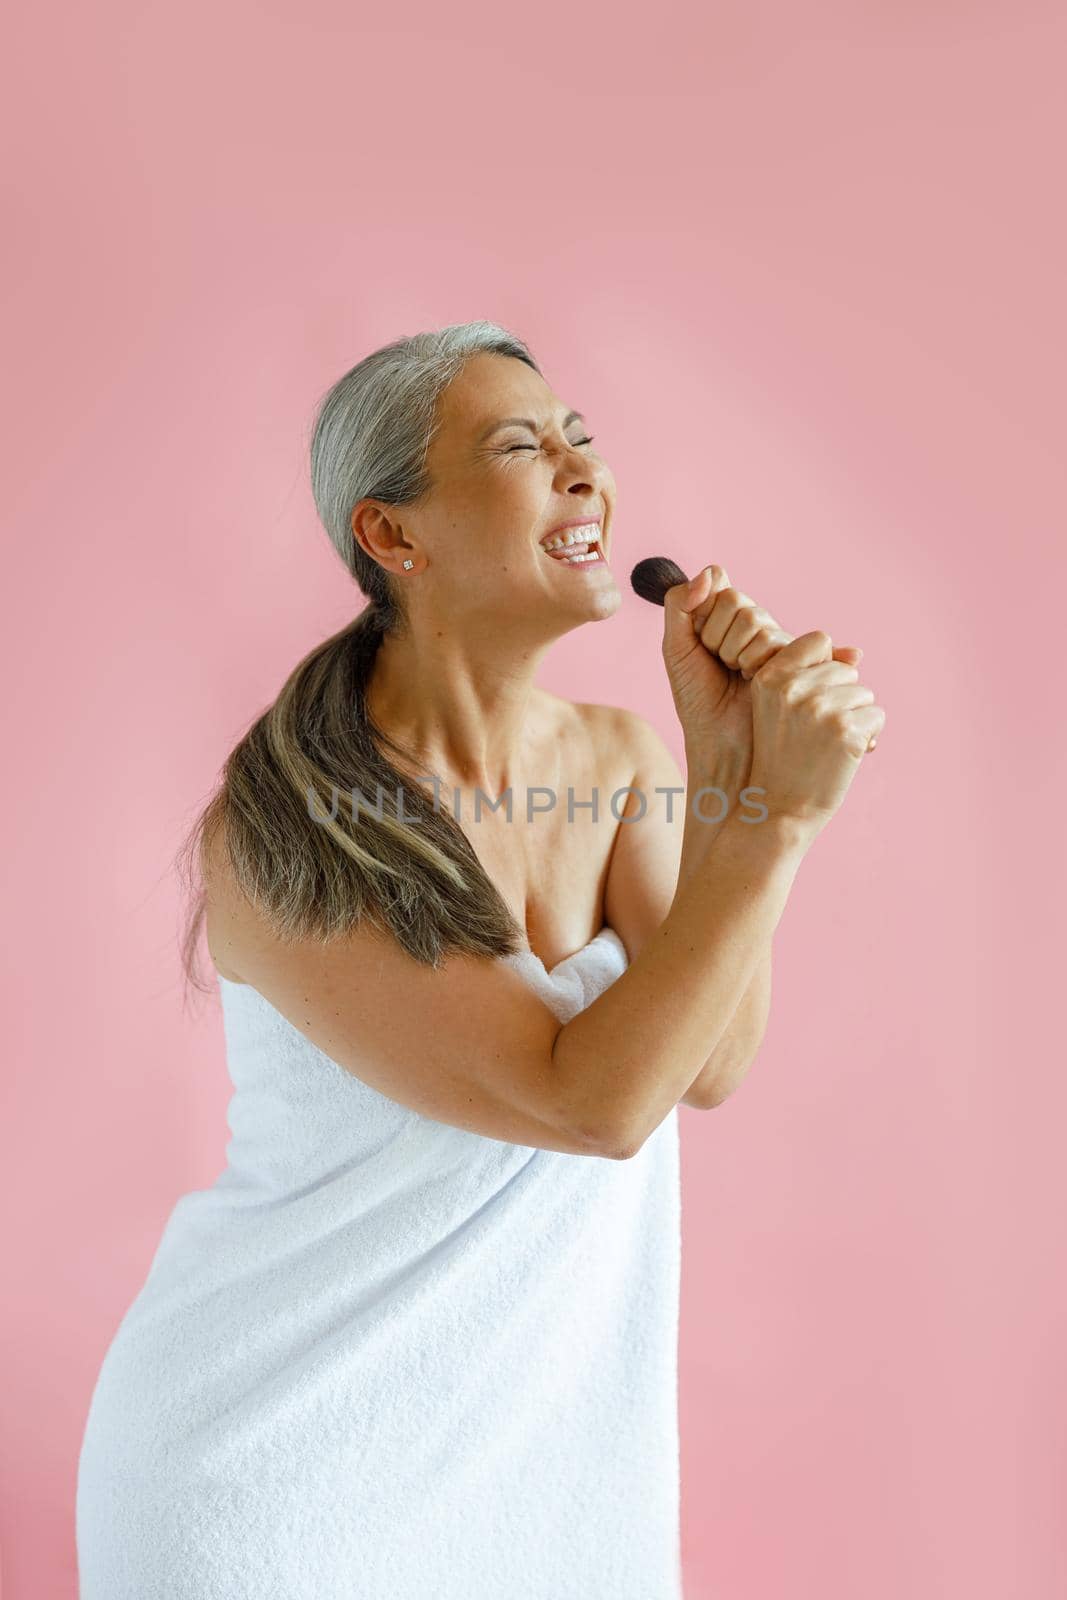 Happy silver haired Asian lady sings song using brush as microphone standing on pink background in studio. Mature beauty lifestyle